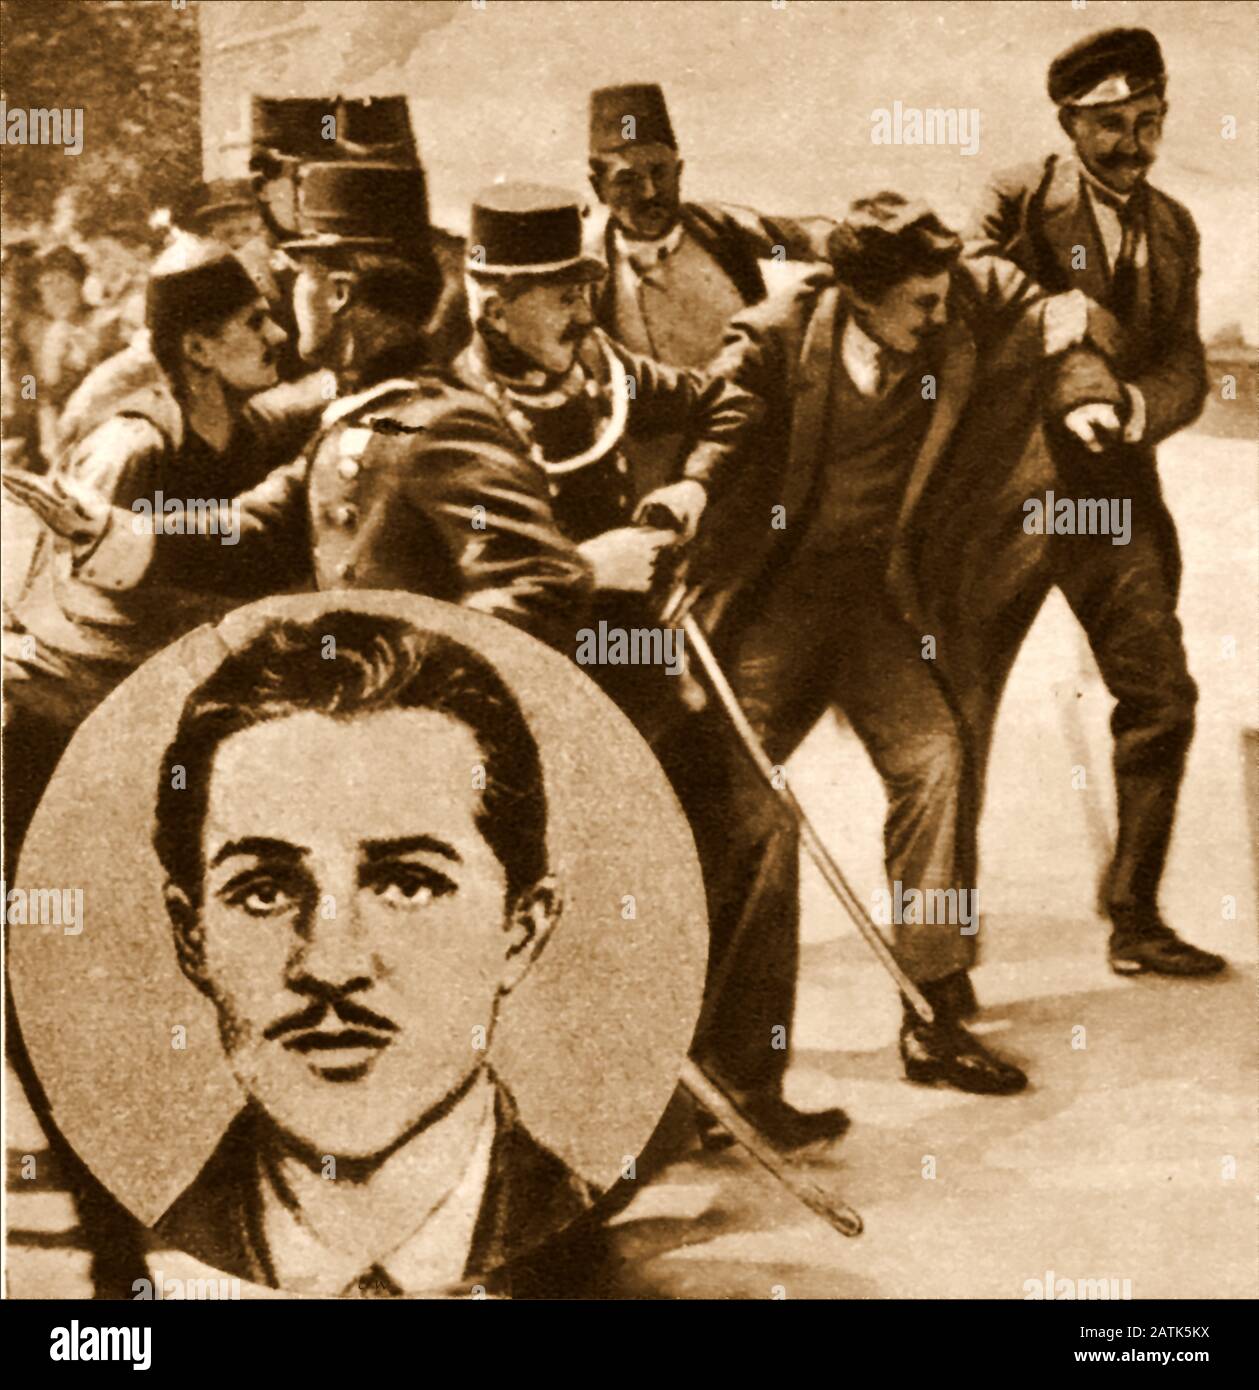 Portrait of Gavrilo Prinzip  and a photograph of his arrest for the assassination of  Archduke Ferdinand (1894-1918). He was a 19 year old Bosnian Serb who was a member of 'Young Bosnia', a movement that  sought an end to Austro-Hungarian rule in Bosnia and Herzegovina. In Sarajevo on 28 June 1914 he assassinated Archduke Franz Ferdinand of Austria and his wife, Sophie, Duchess of Hohenberg, . Stock Photo